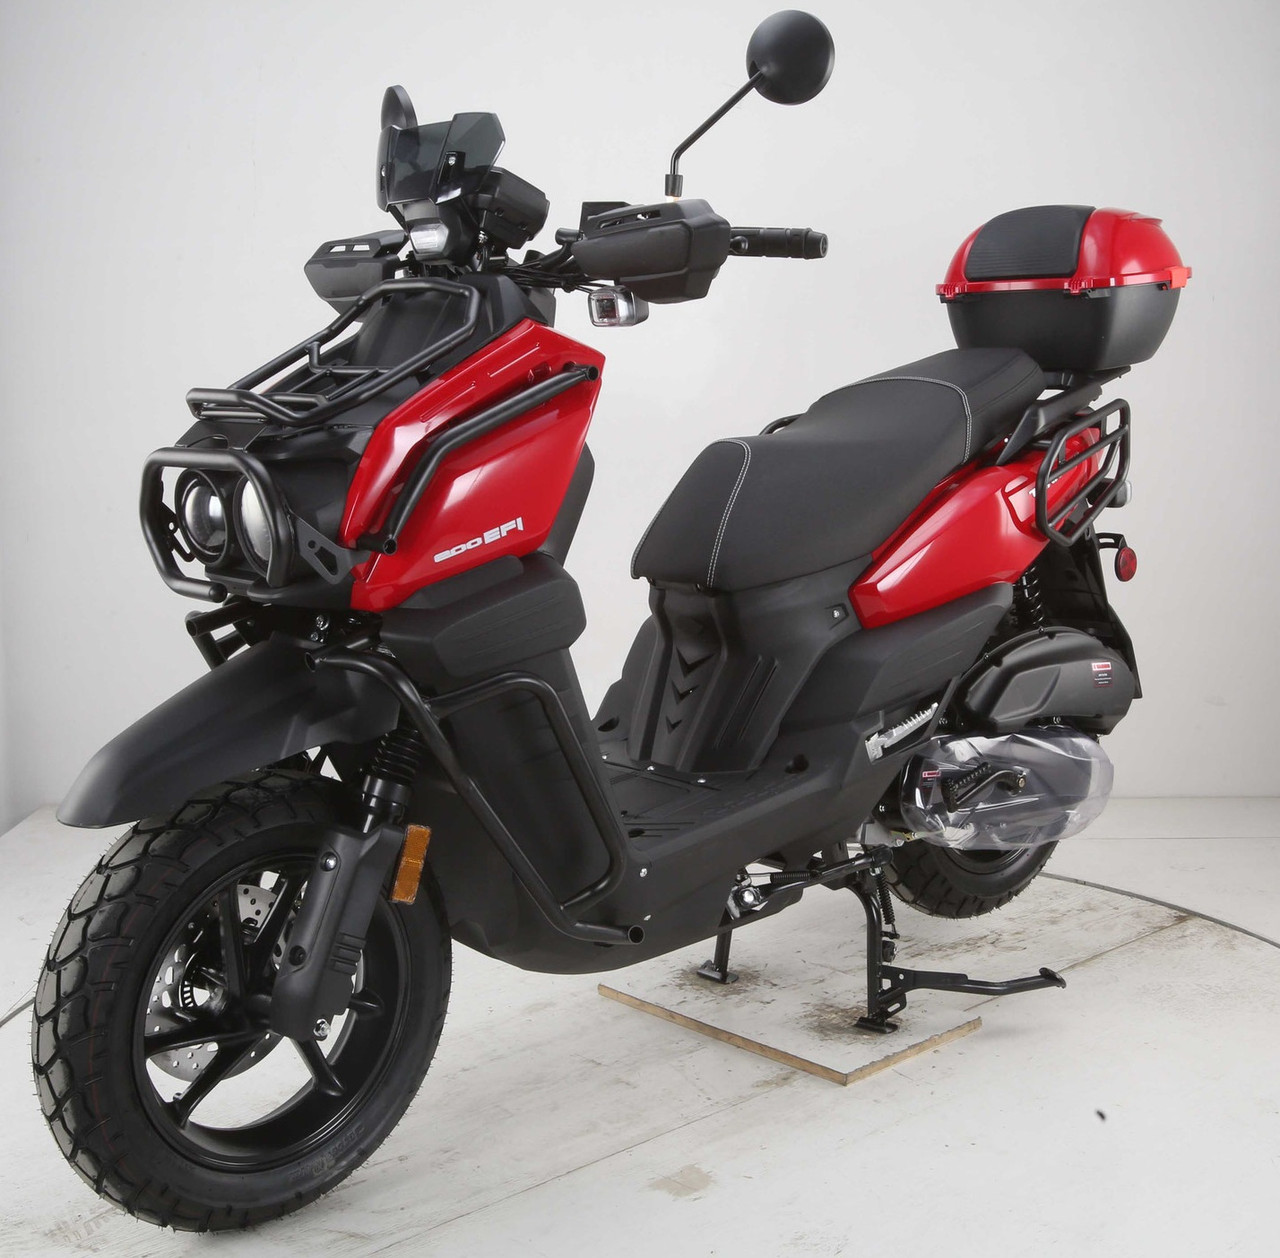 Vitacci Tank 200 EFI Scooter, (GY6) 4-Stroke, Air cooled, Alloy RIM